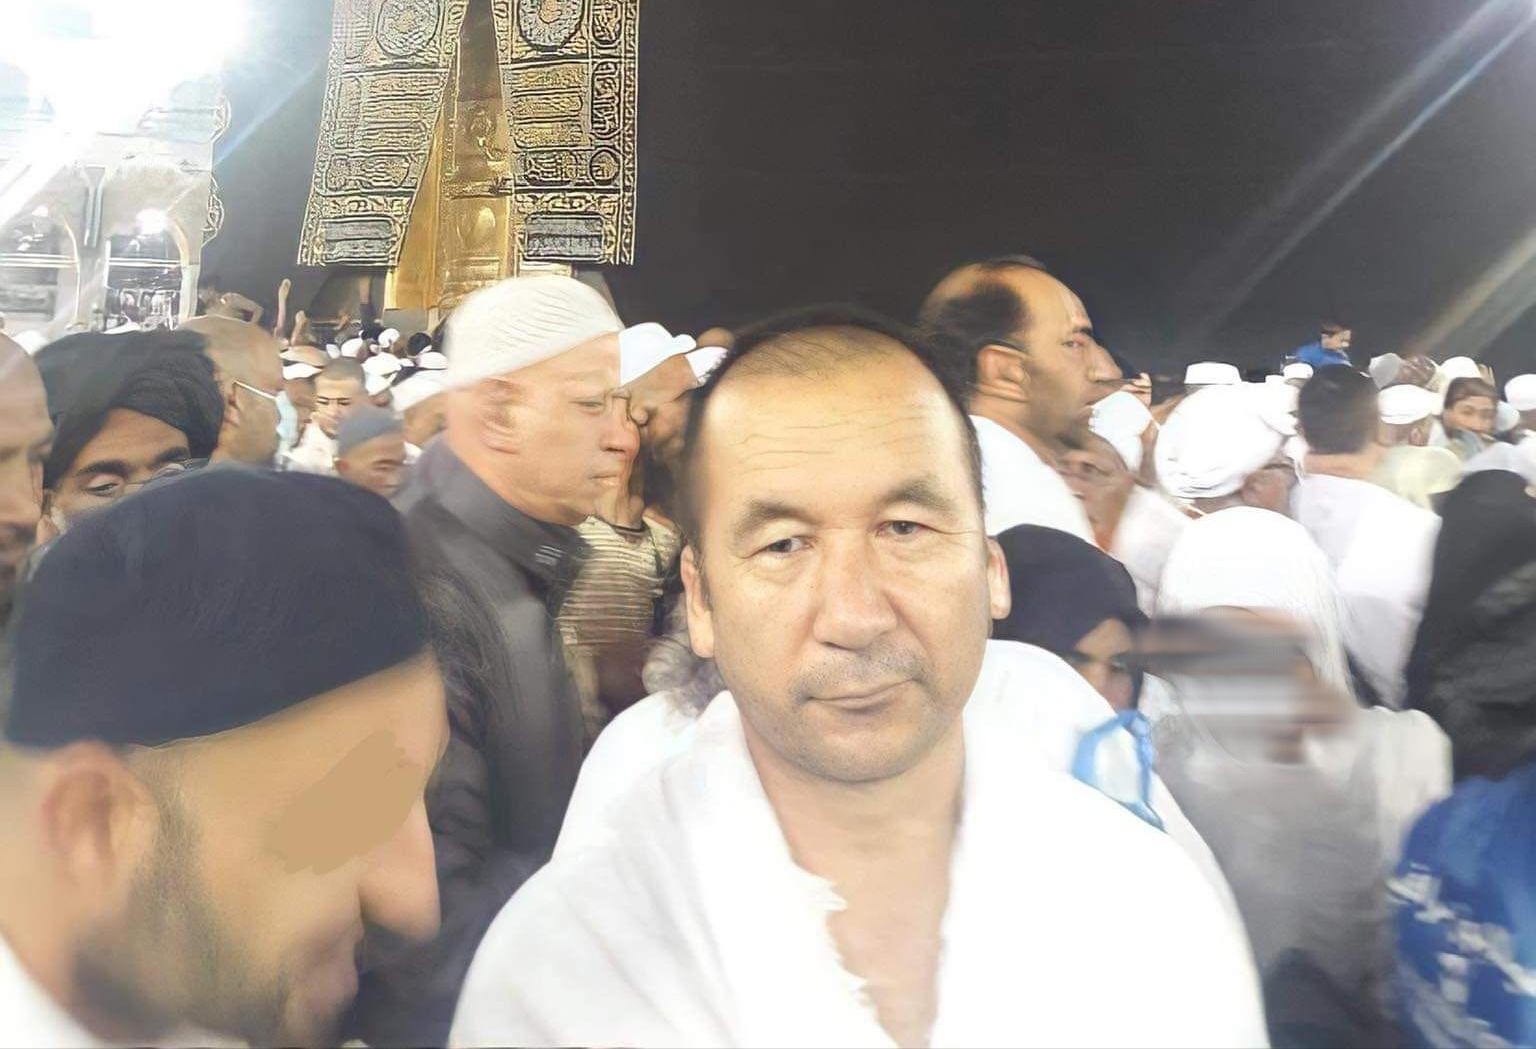 Aimadoula Waili pictured in front of the Grand Mosque in Mecca before he was detained in Saudi Arabia (Supplied)